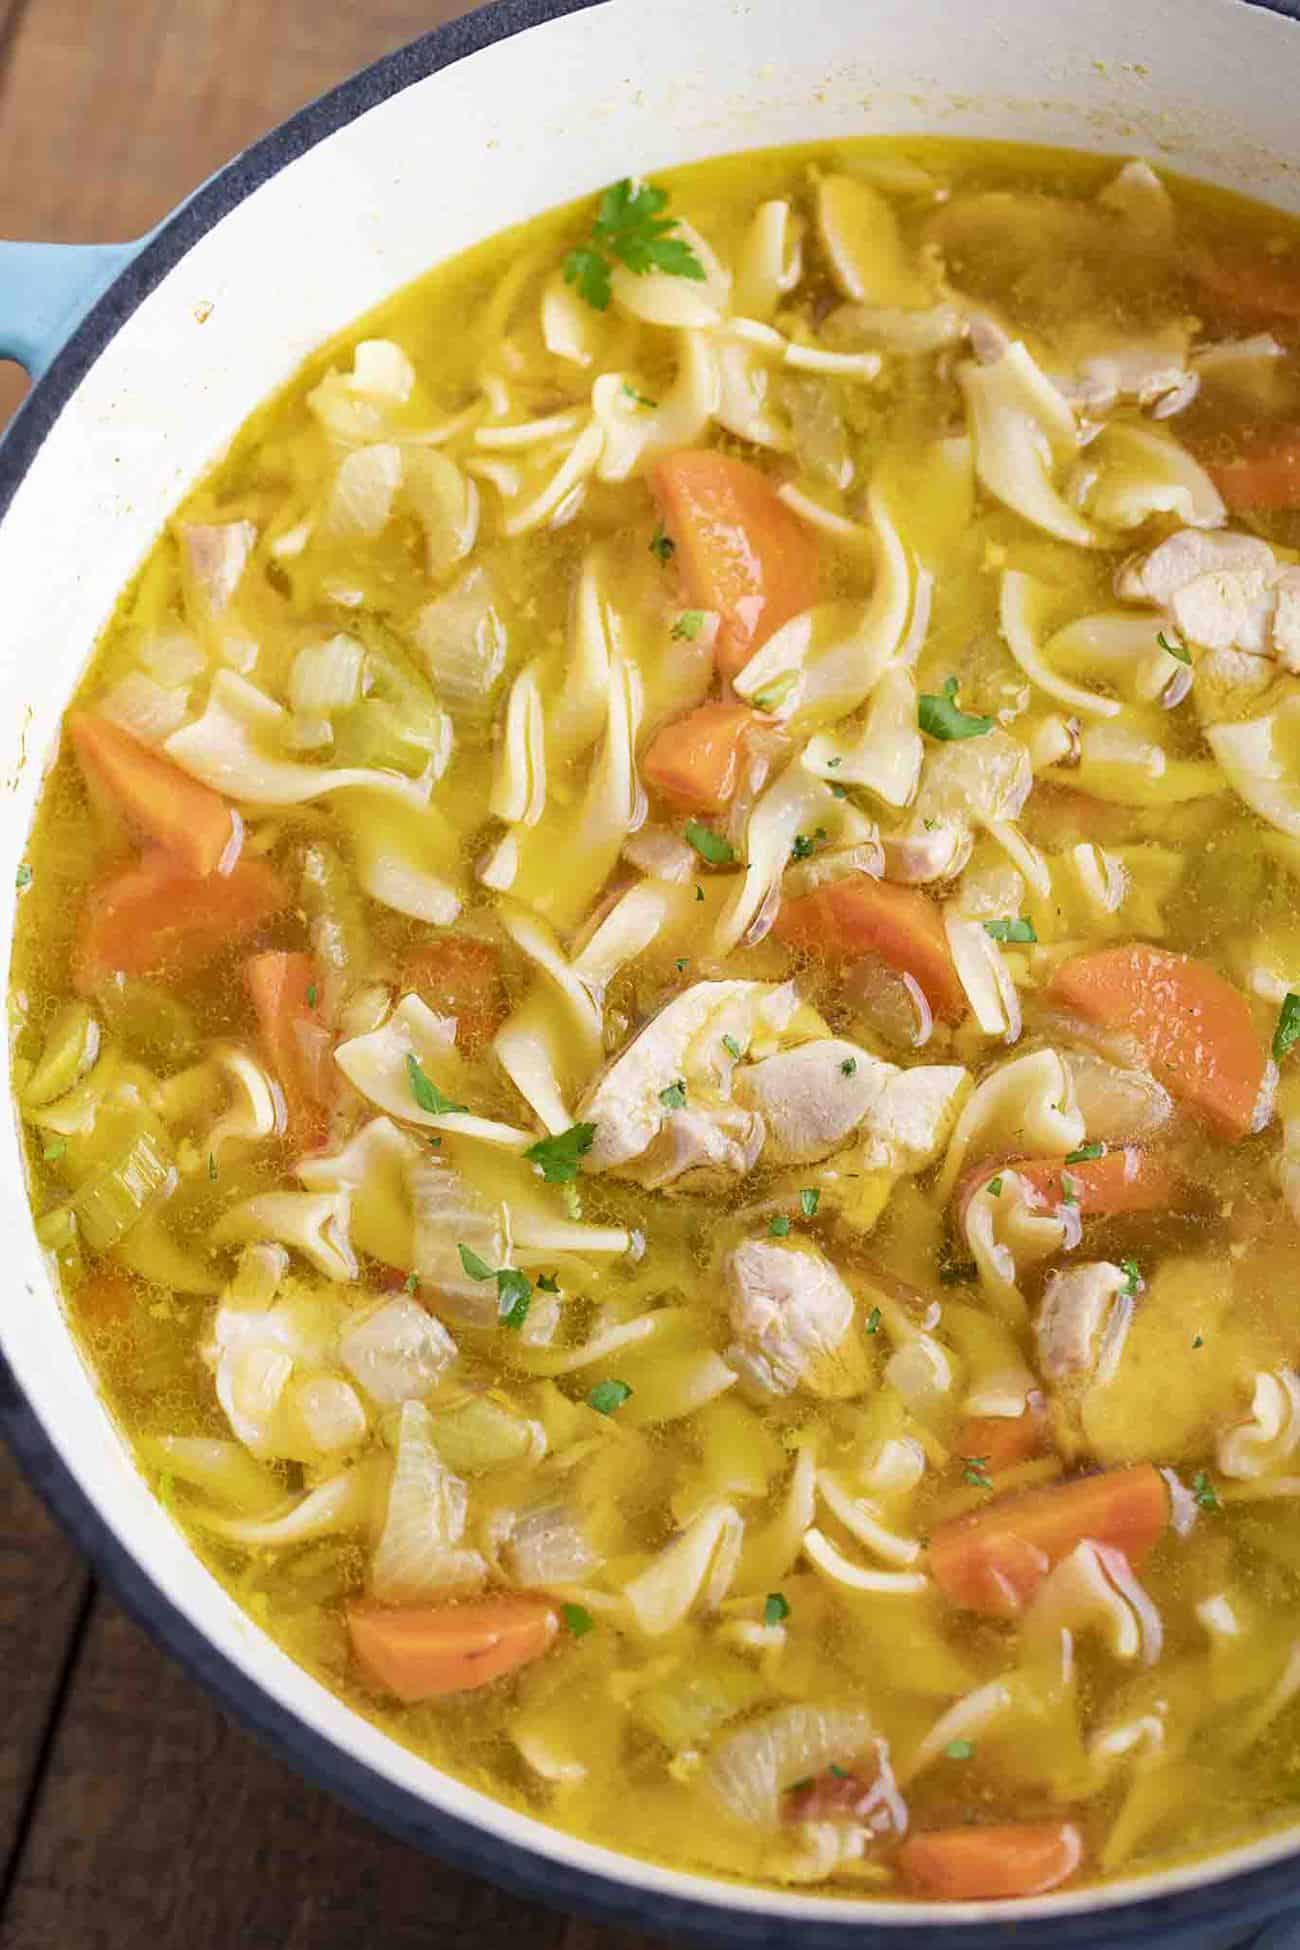 Soup Recipes Can Be Fun For Anyone